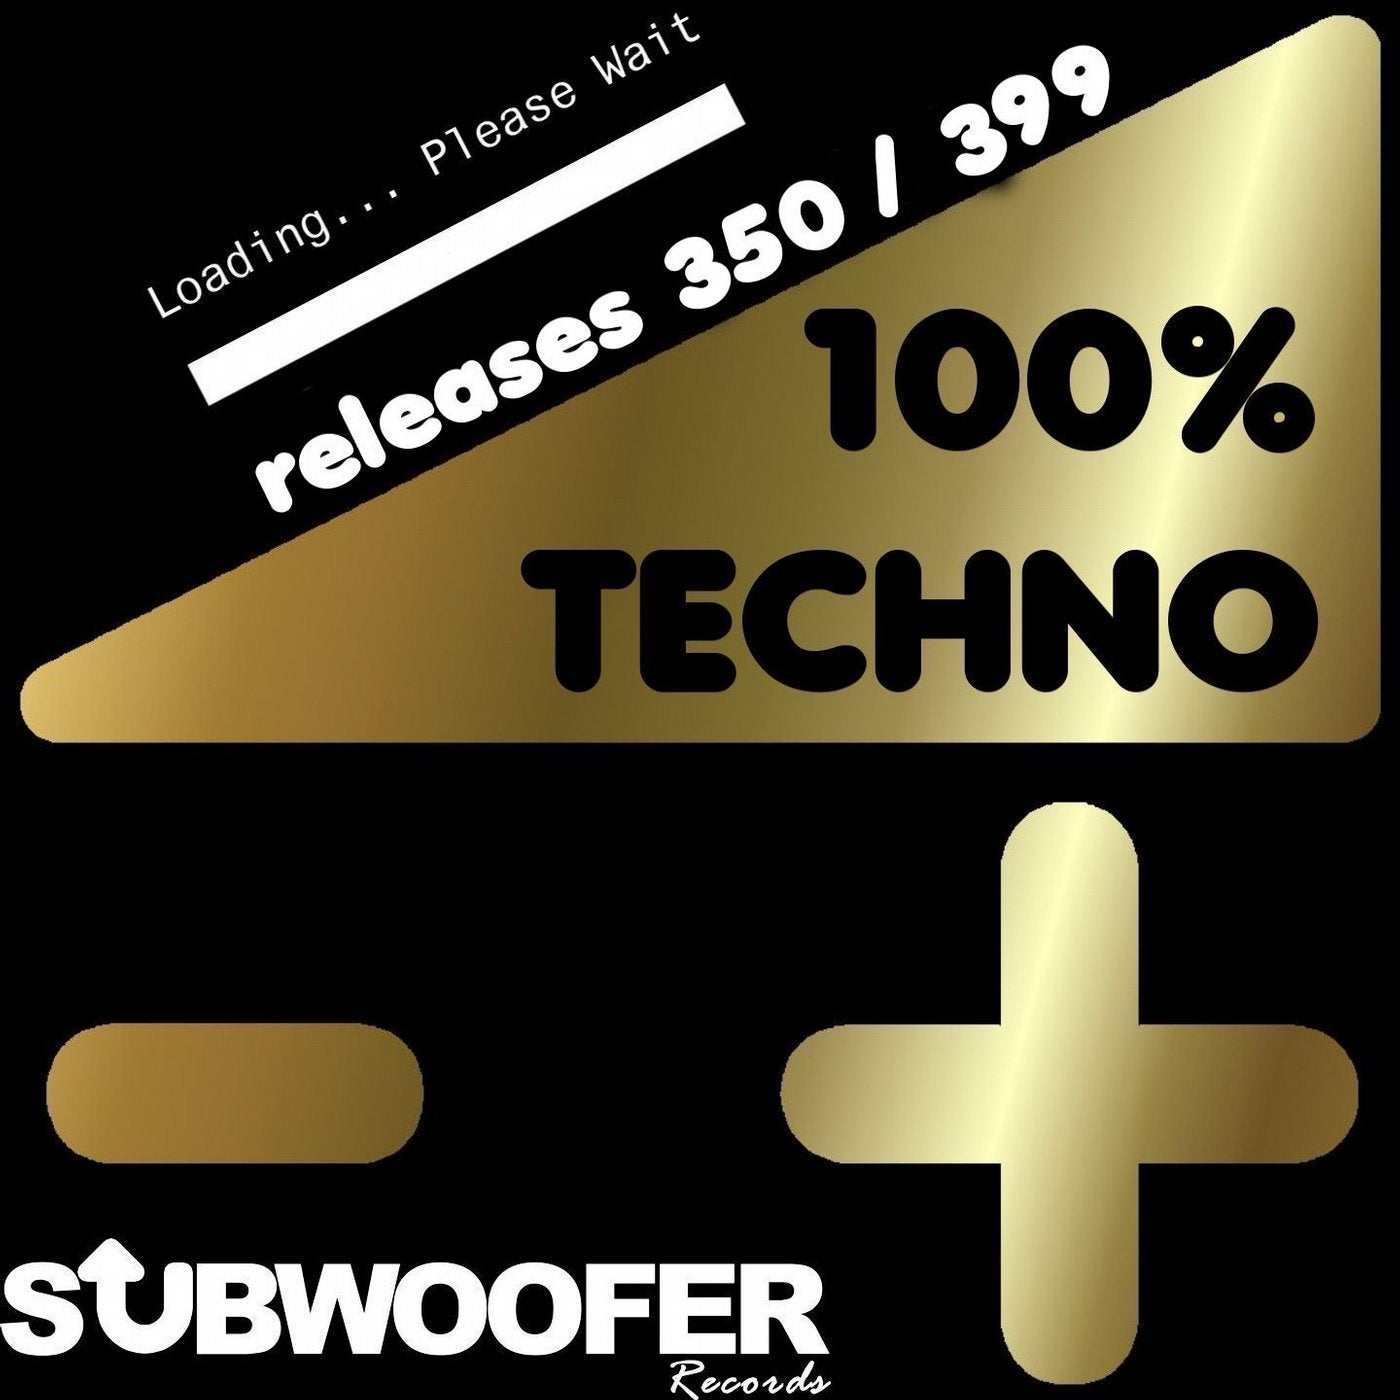 100%% Techno Subwoofer Records, Vol. 8 (Releases 350 / 399)